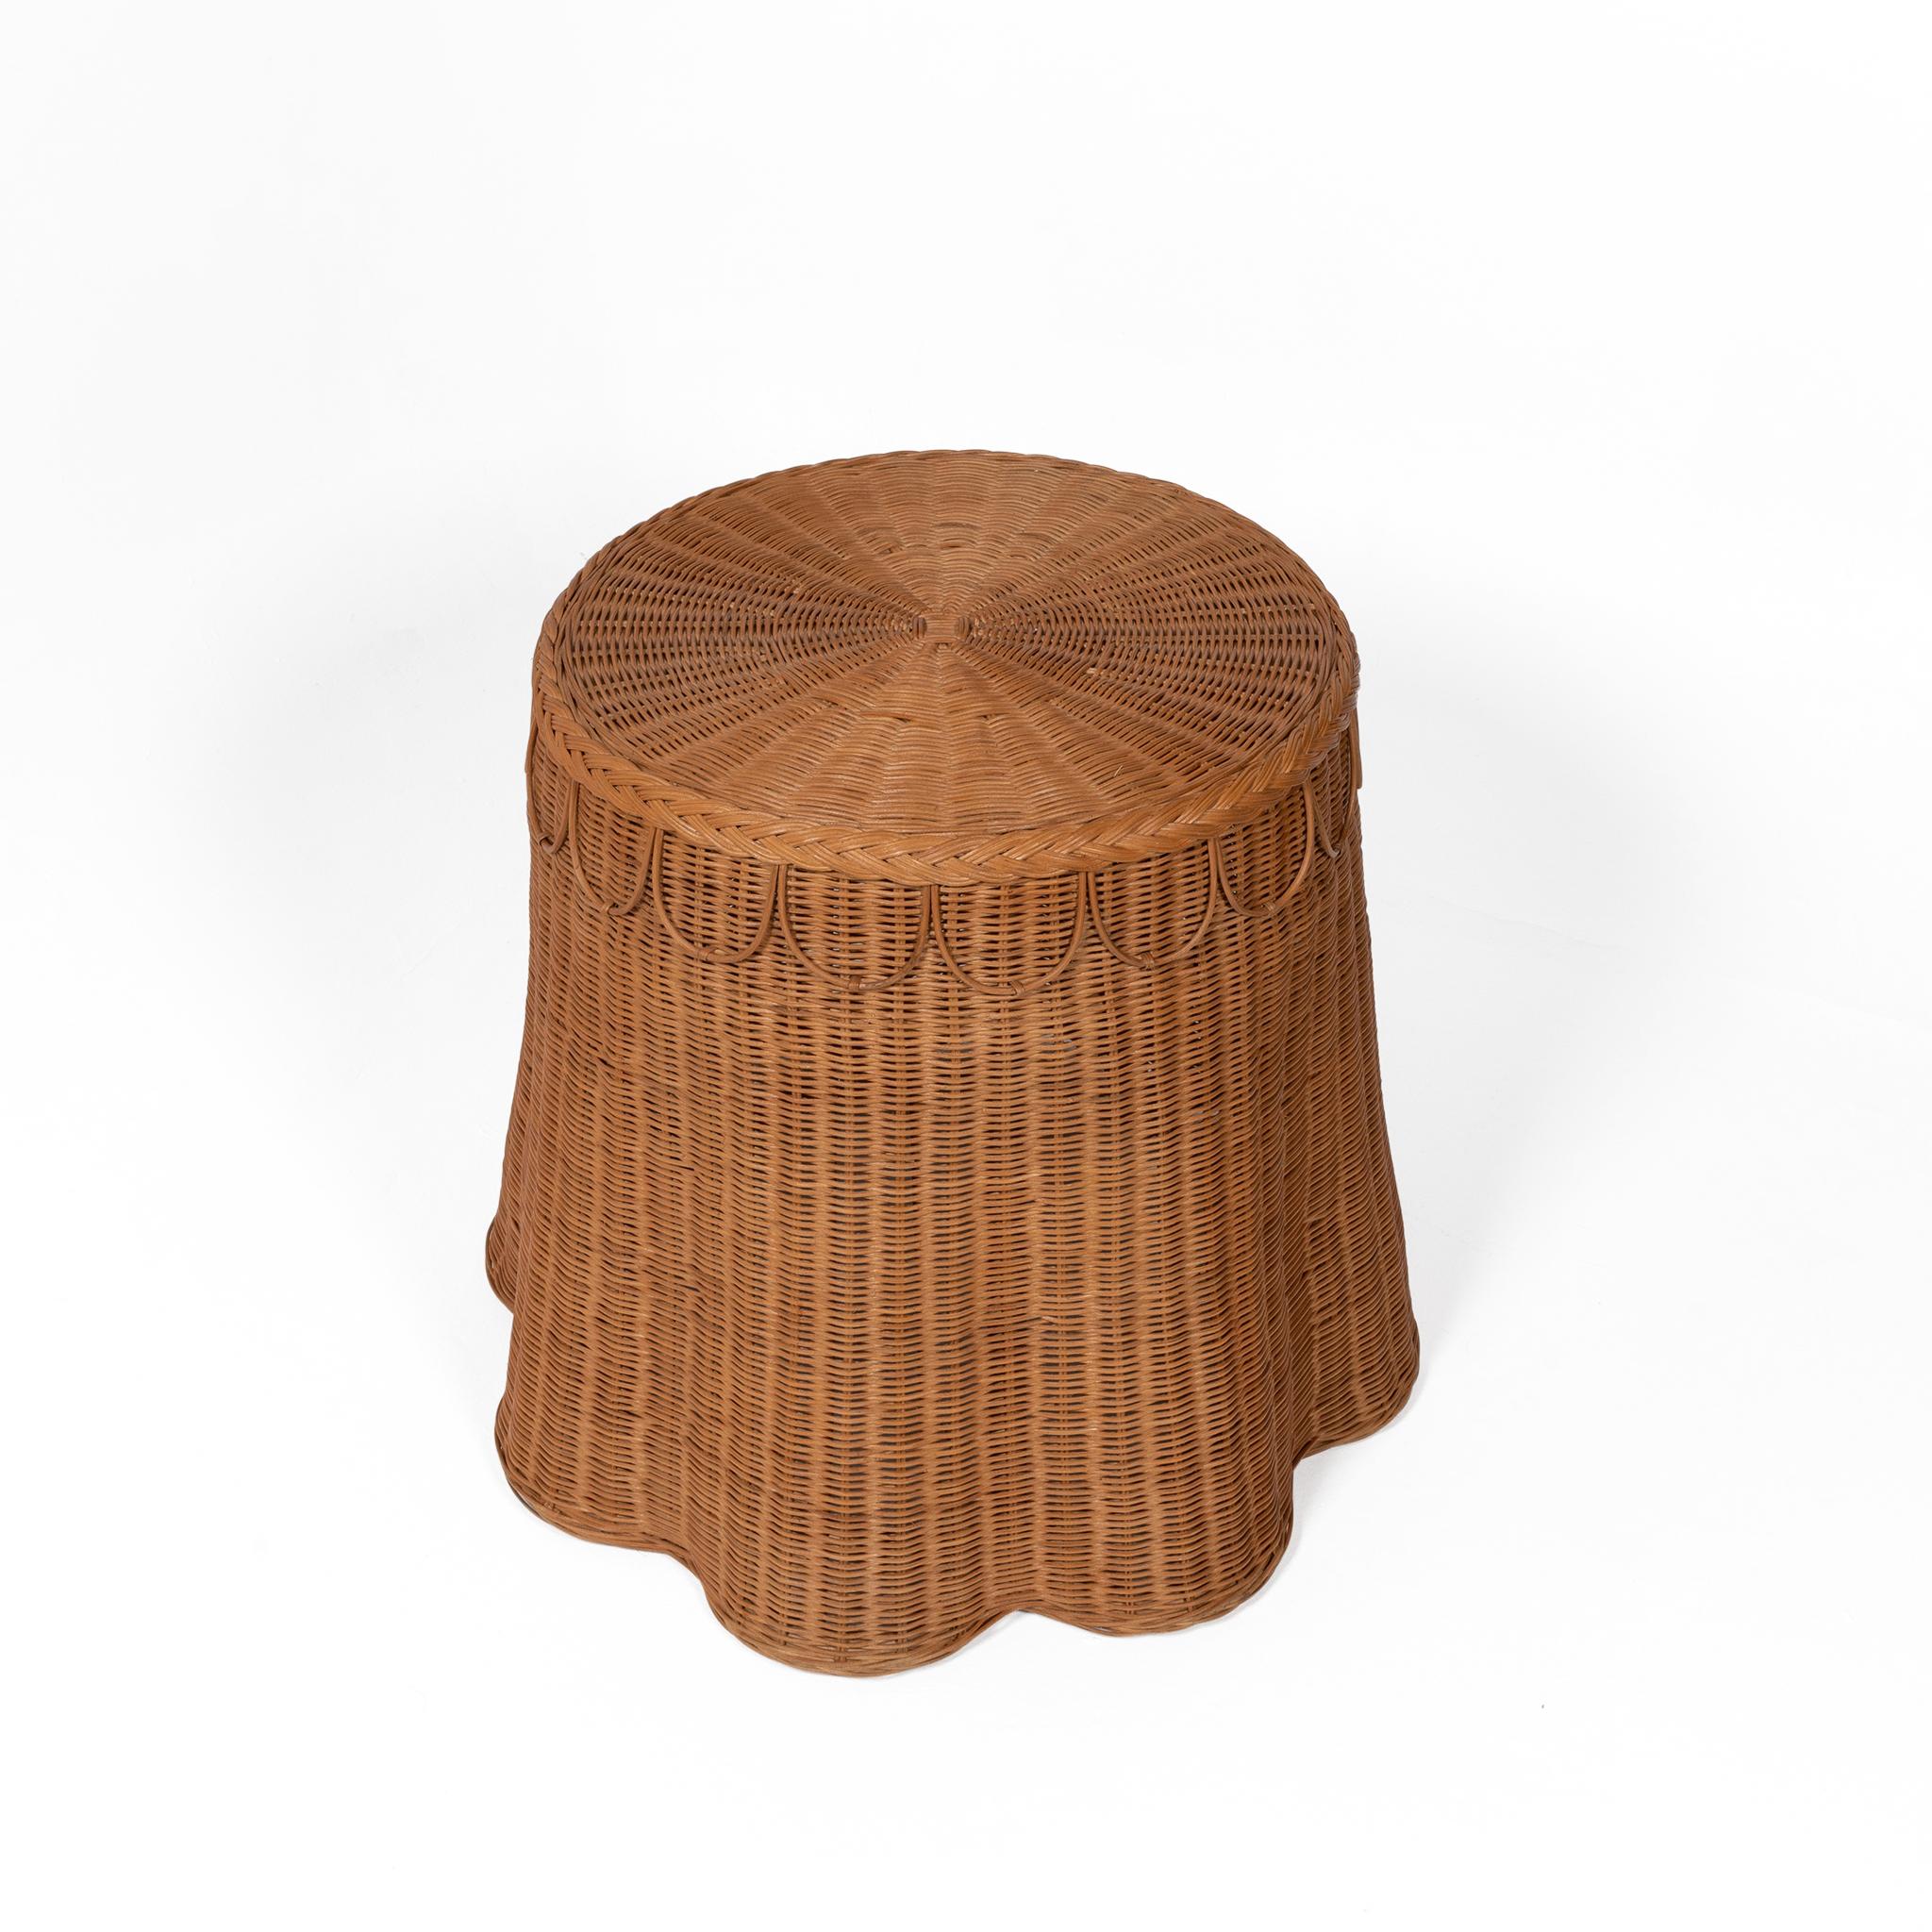 We designed the Adeline Side Table to stay with you for life. Designed by Louise Roe and built to last by our artisans, in 100% natural rattan, the cylindrical top trickles down to form beautiful scallops at the base. It fits anywhere: next to the